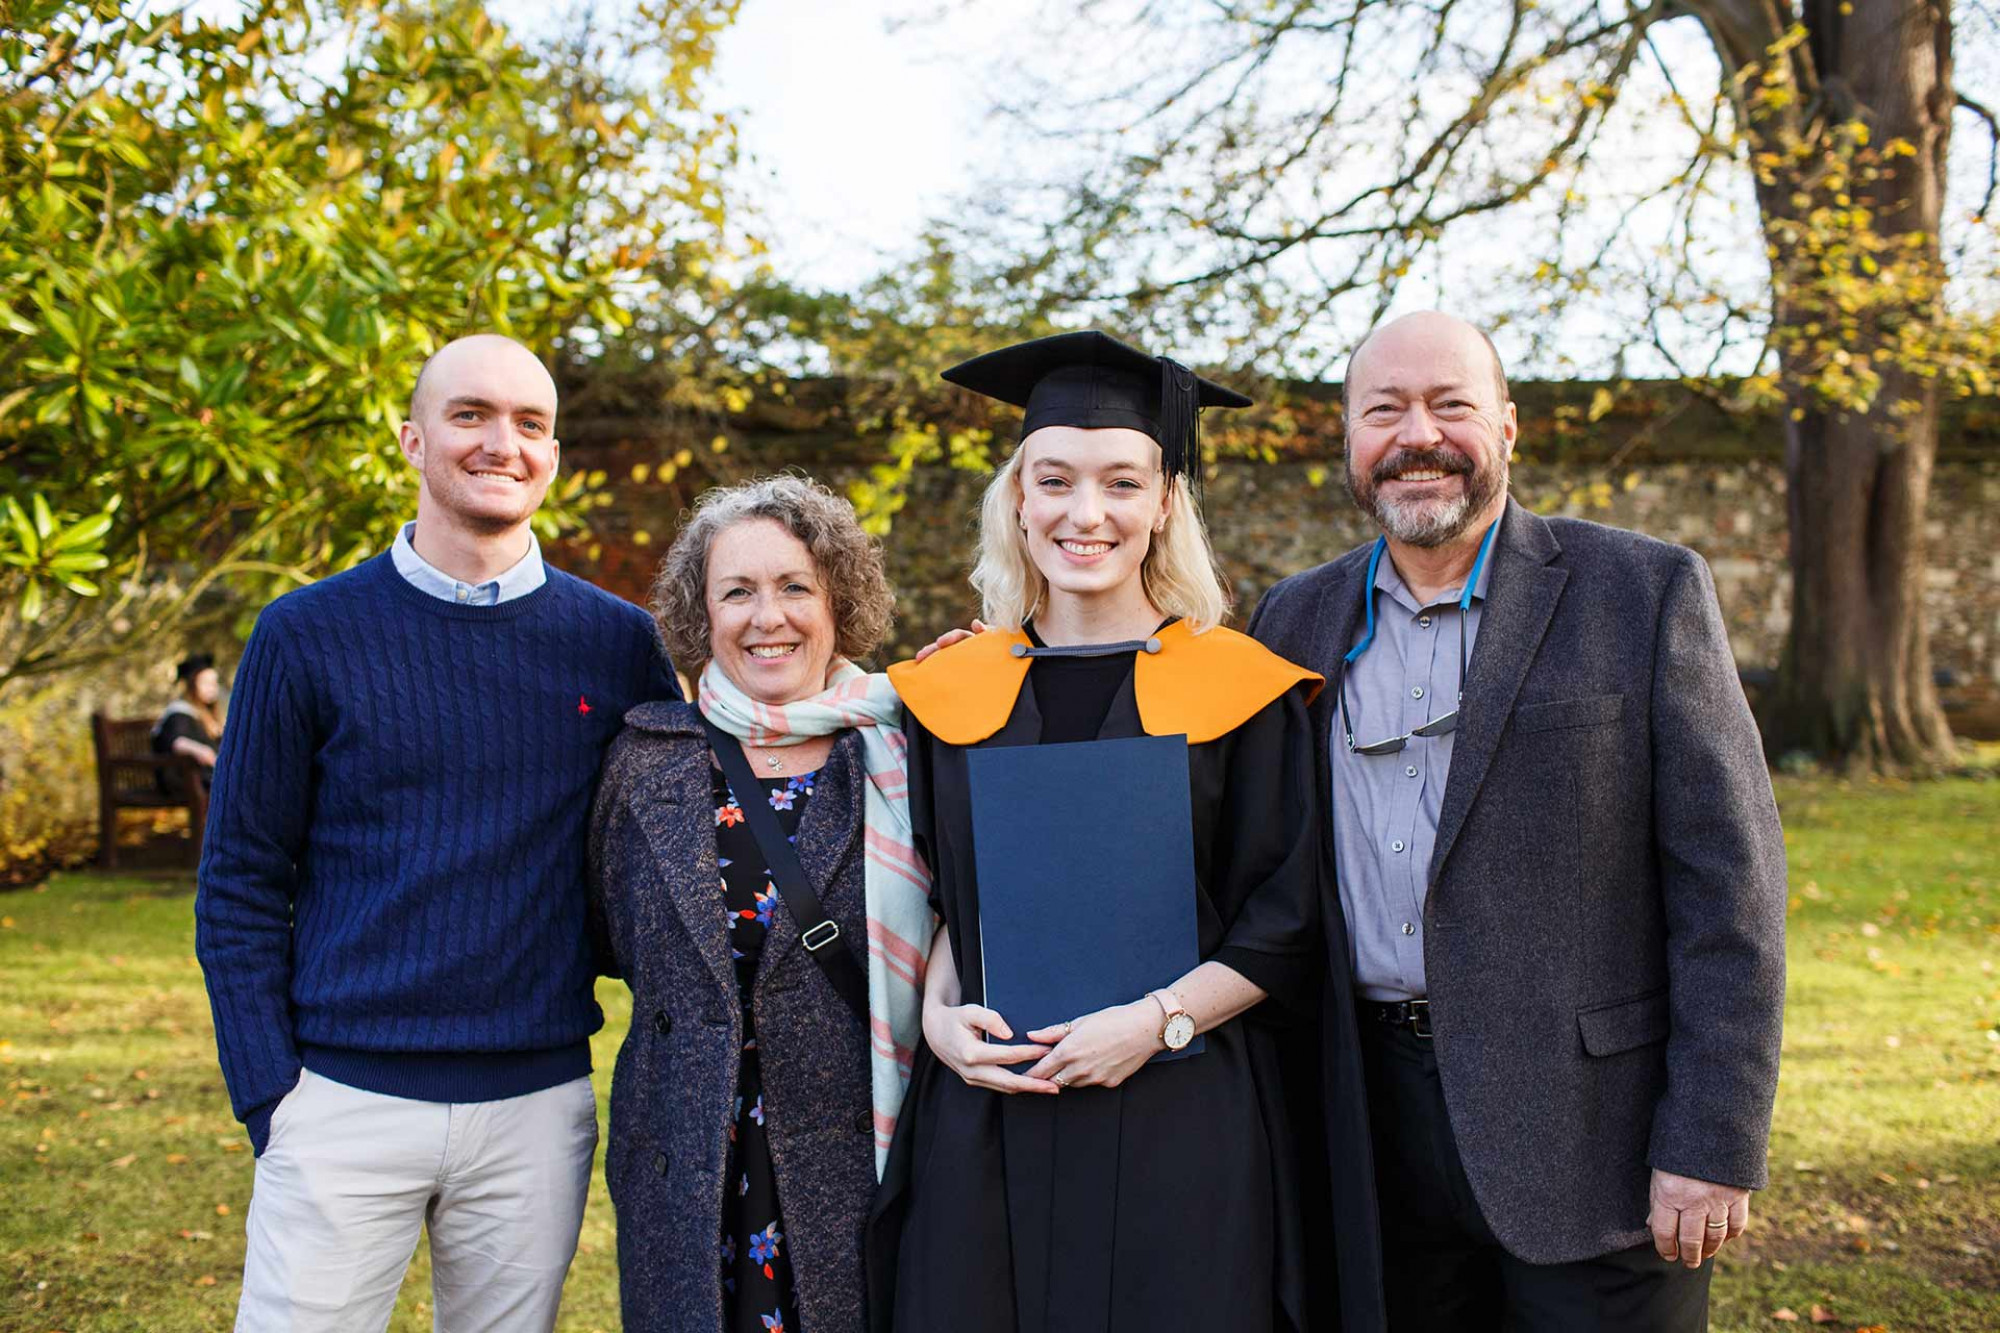 A graduate with her guests looking at the camera